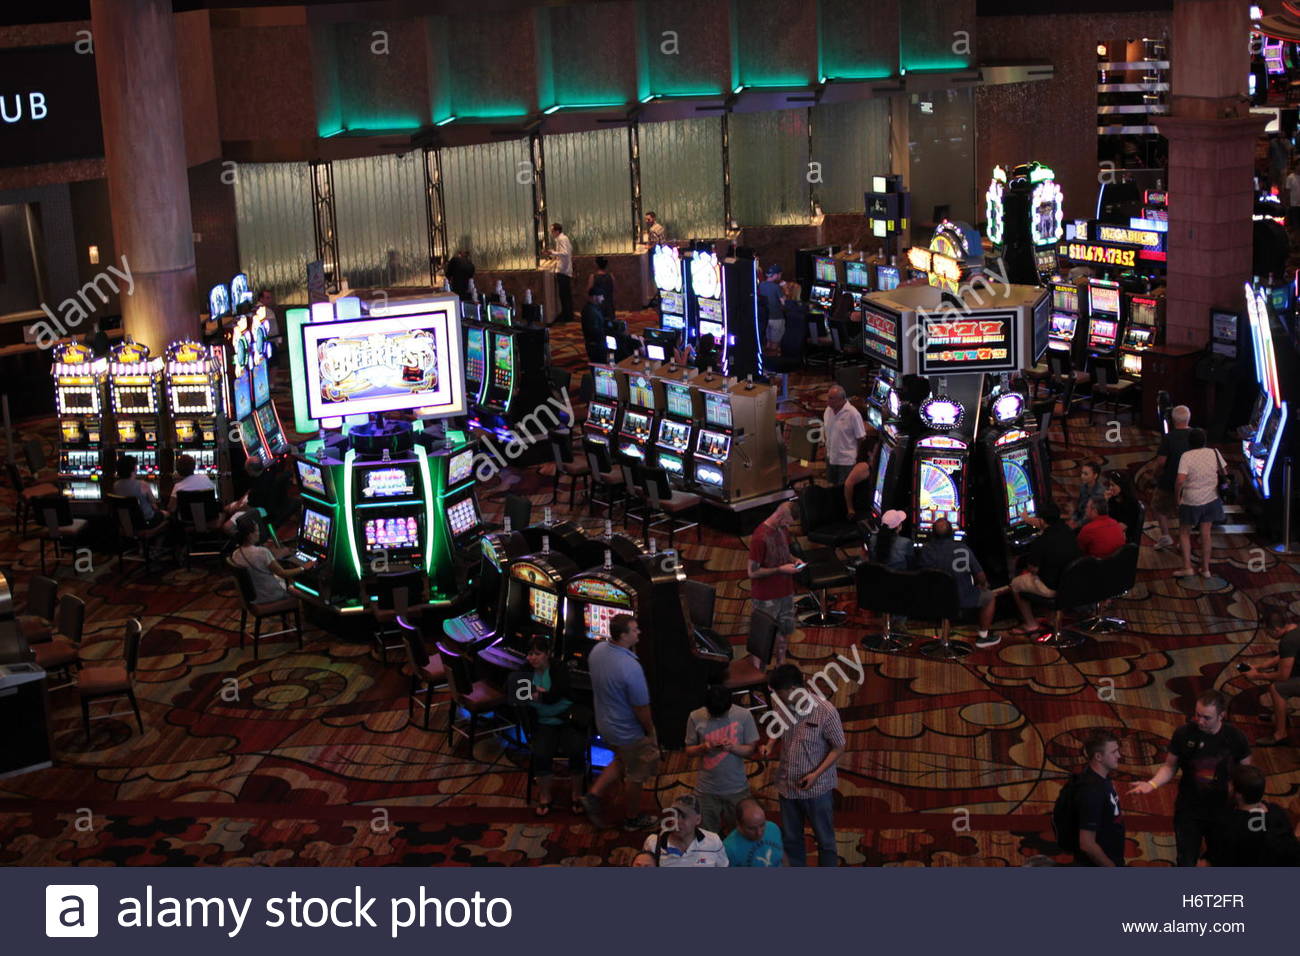 closest casinos with slots near me